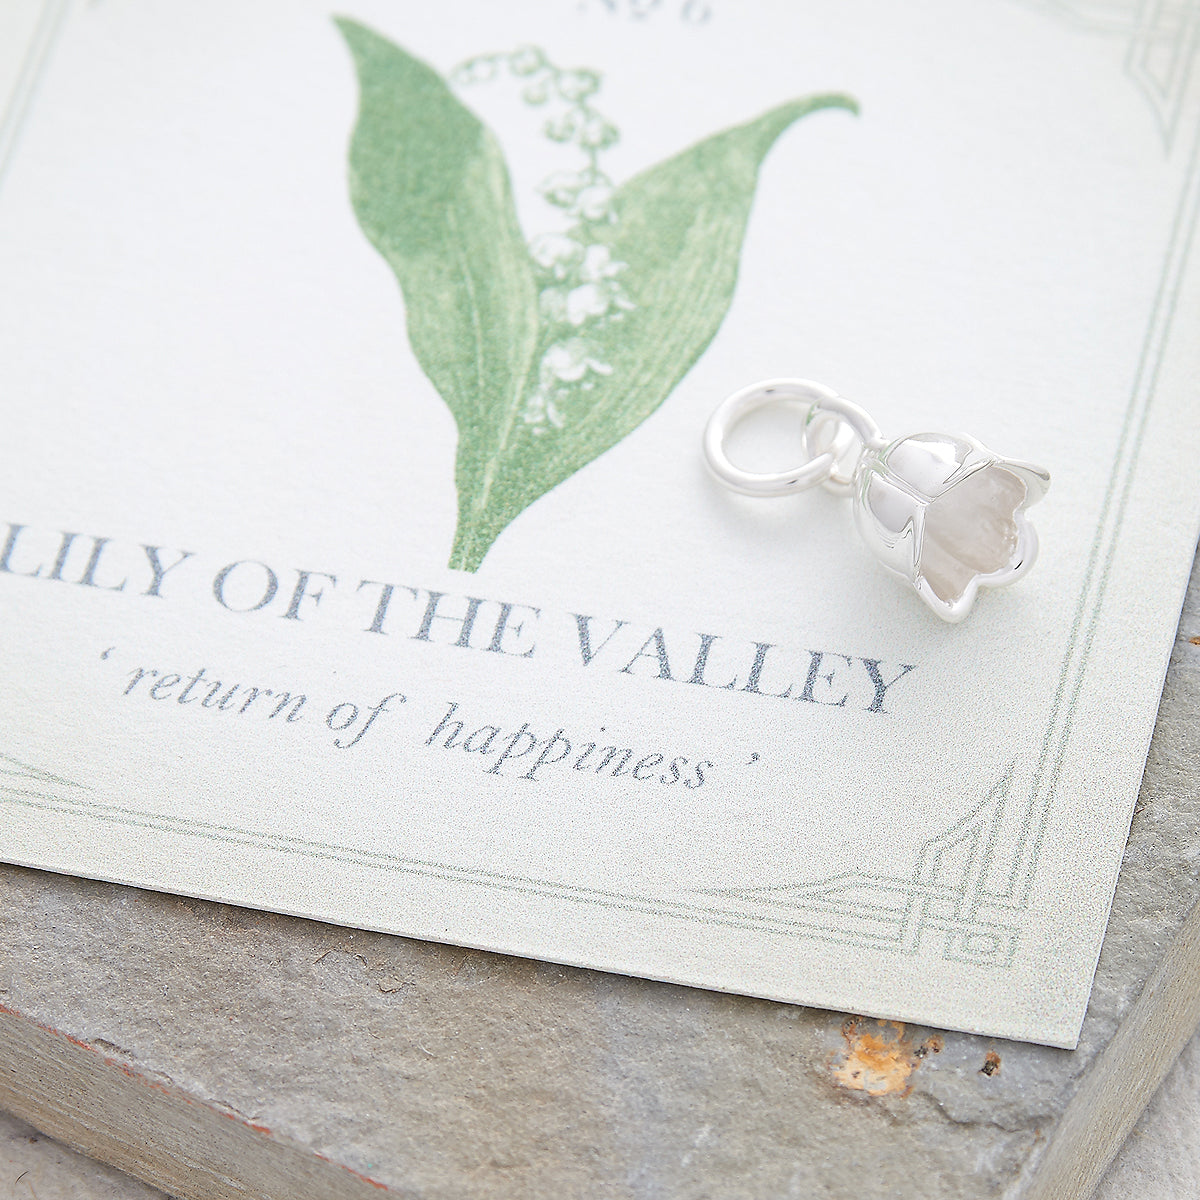 lily of the valley meaning return of happiness